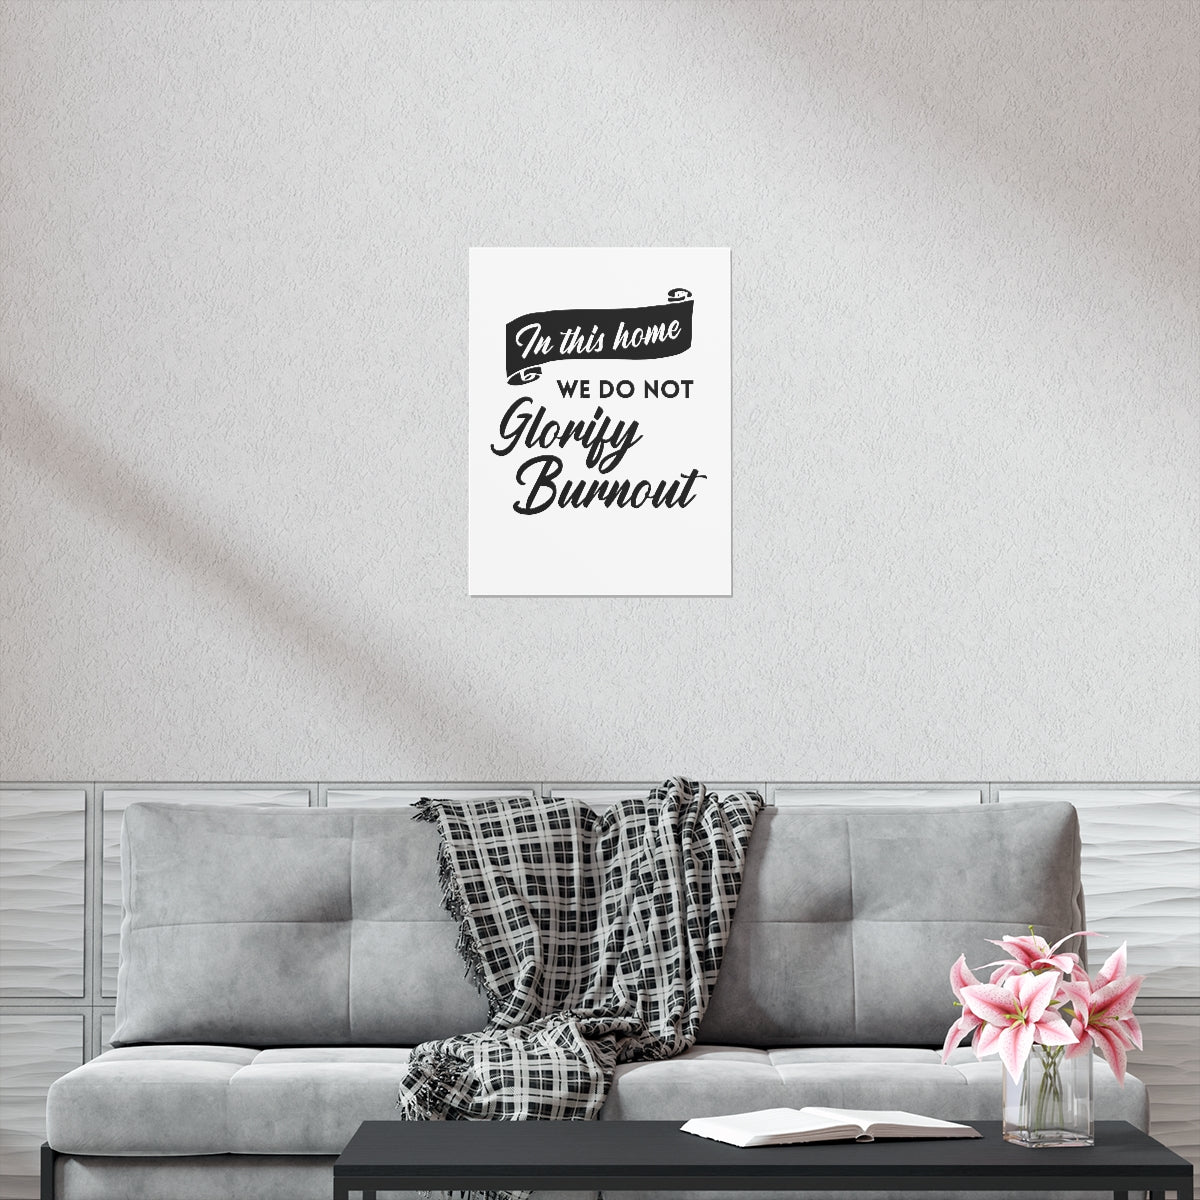 "In This Home We Do Not Glorify Burnout" Poster